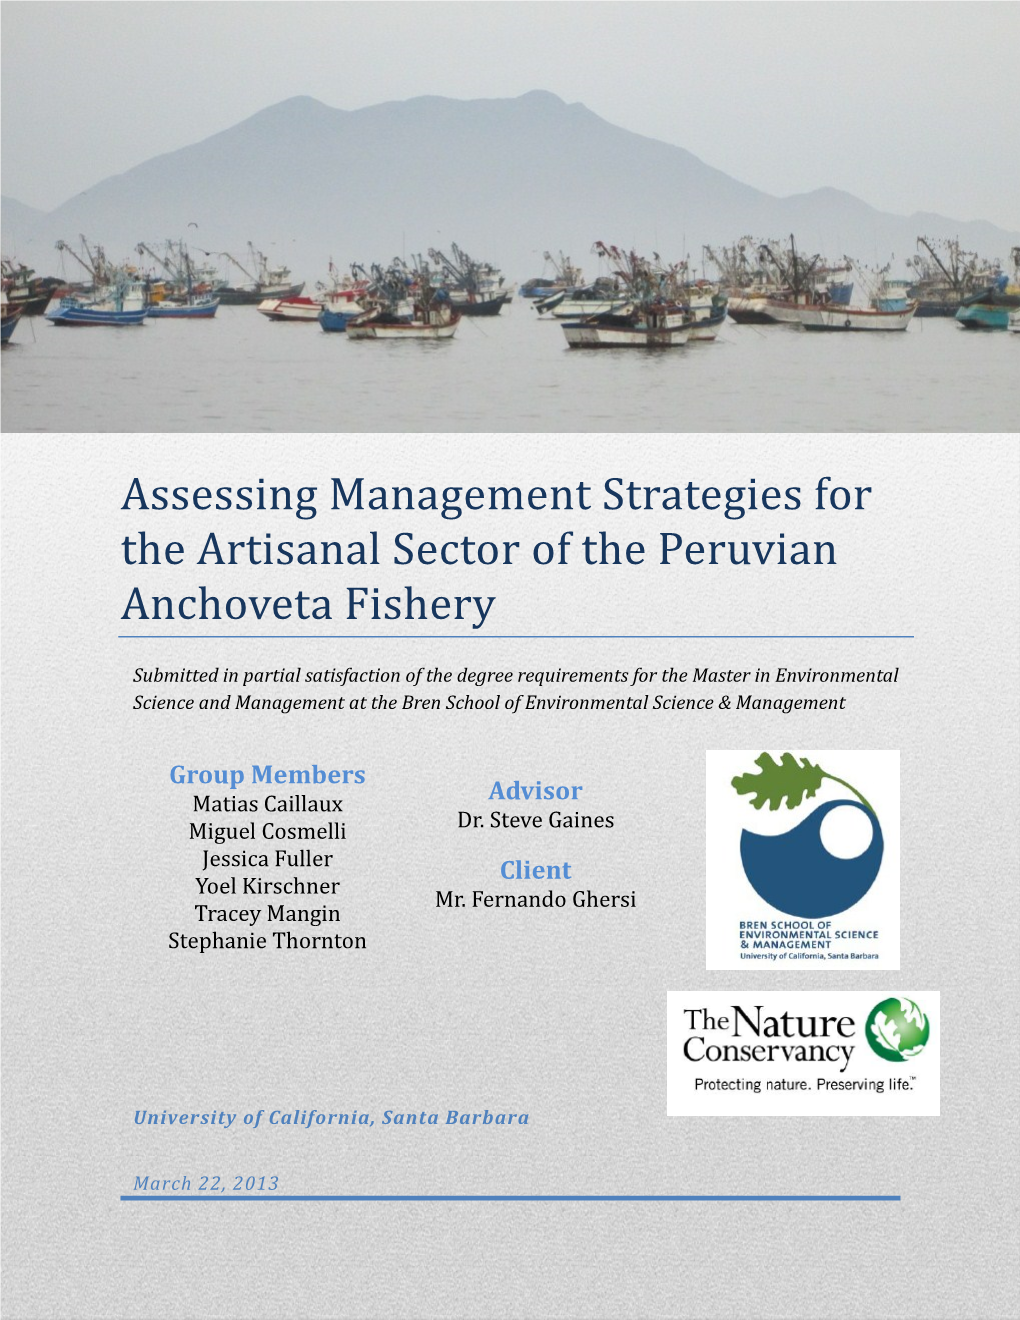 Assessing Management Strategies for the Artisanal Sector of the Peruvian Anchoveta Fishery